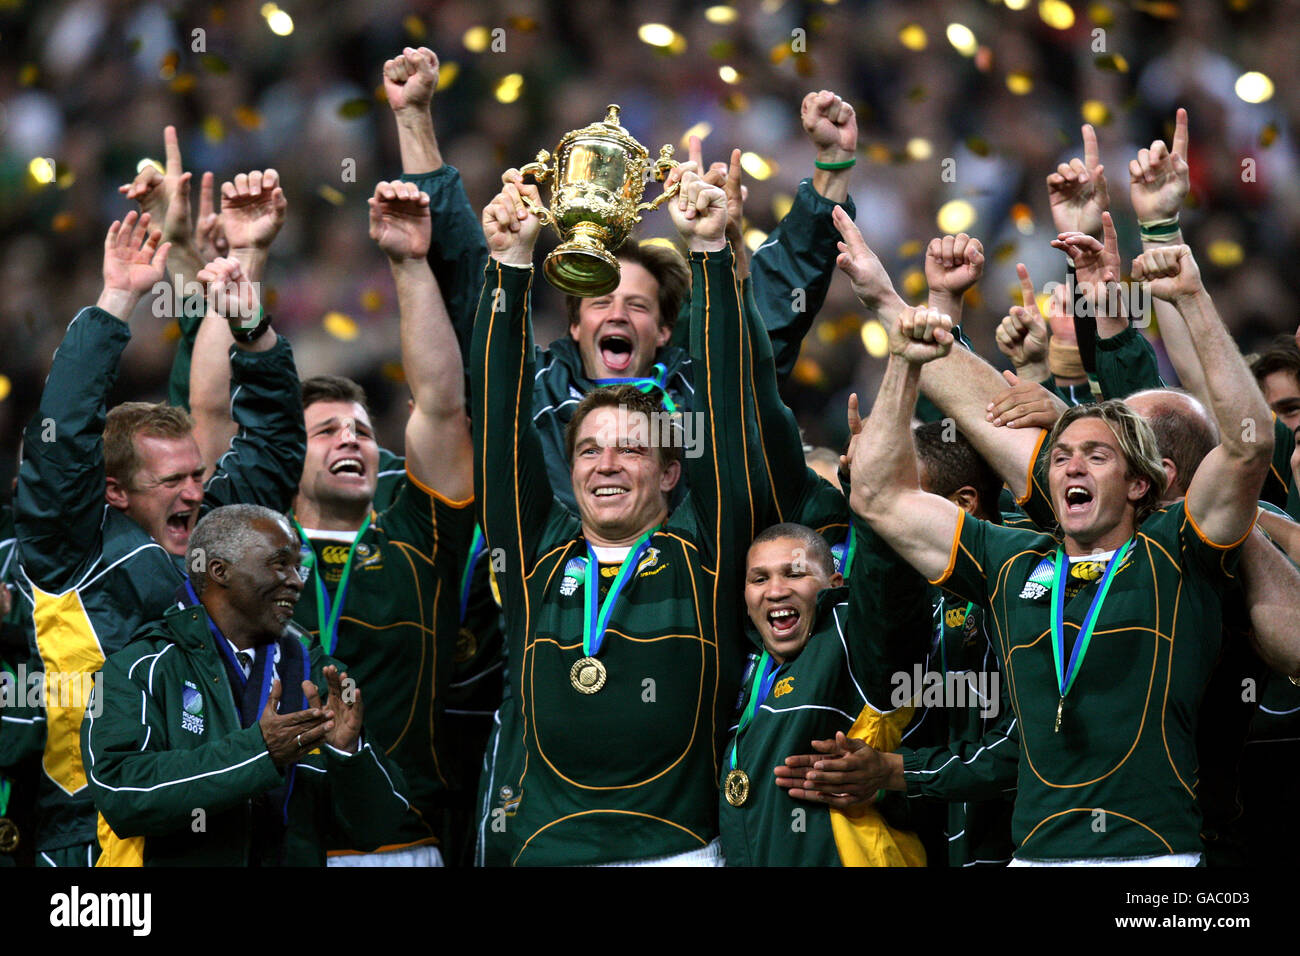 Rugby Union - IRB Rugby World Cup 2007 - Final - England v South Africa -  Stade de France. South Africa's John Smit lifts the trophy following the  IRB Rugby World Cup